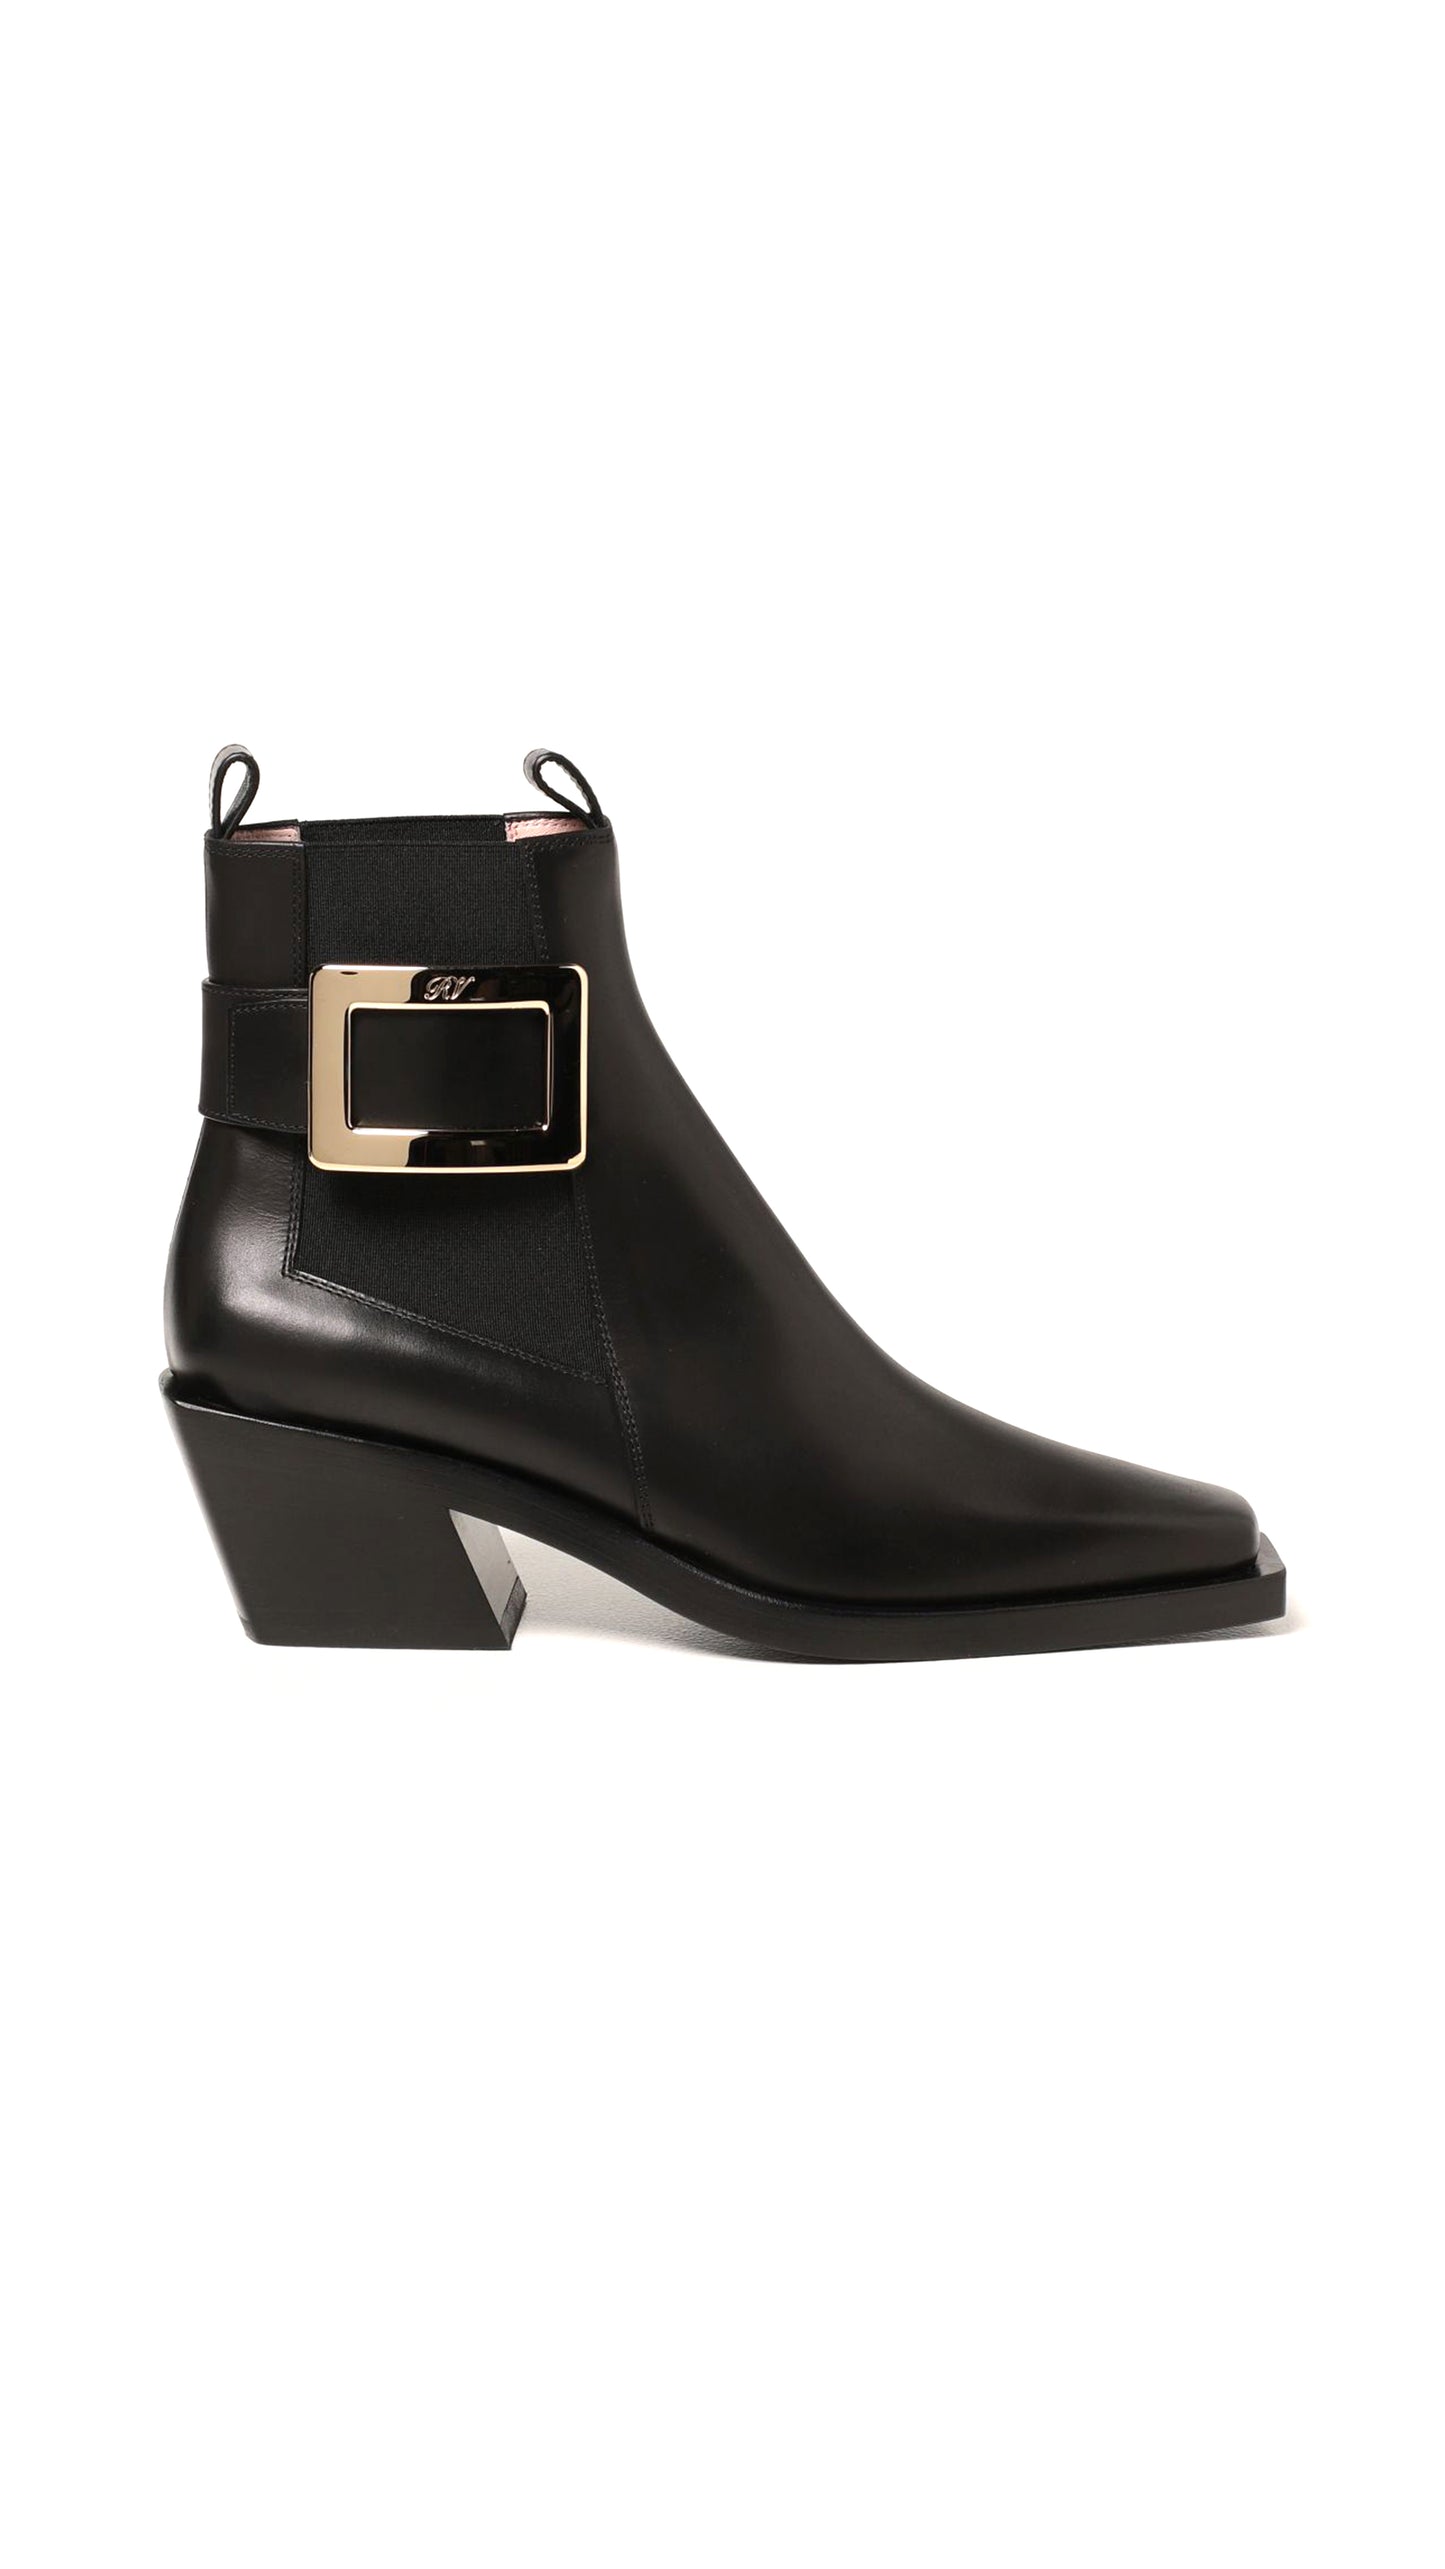 Metal Buckle Ankle Boots - Black